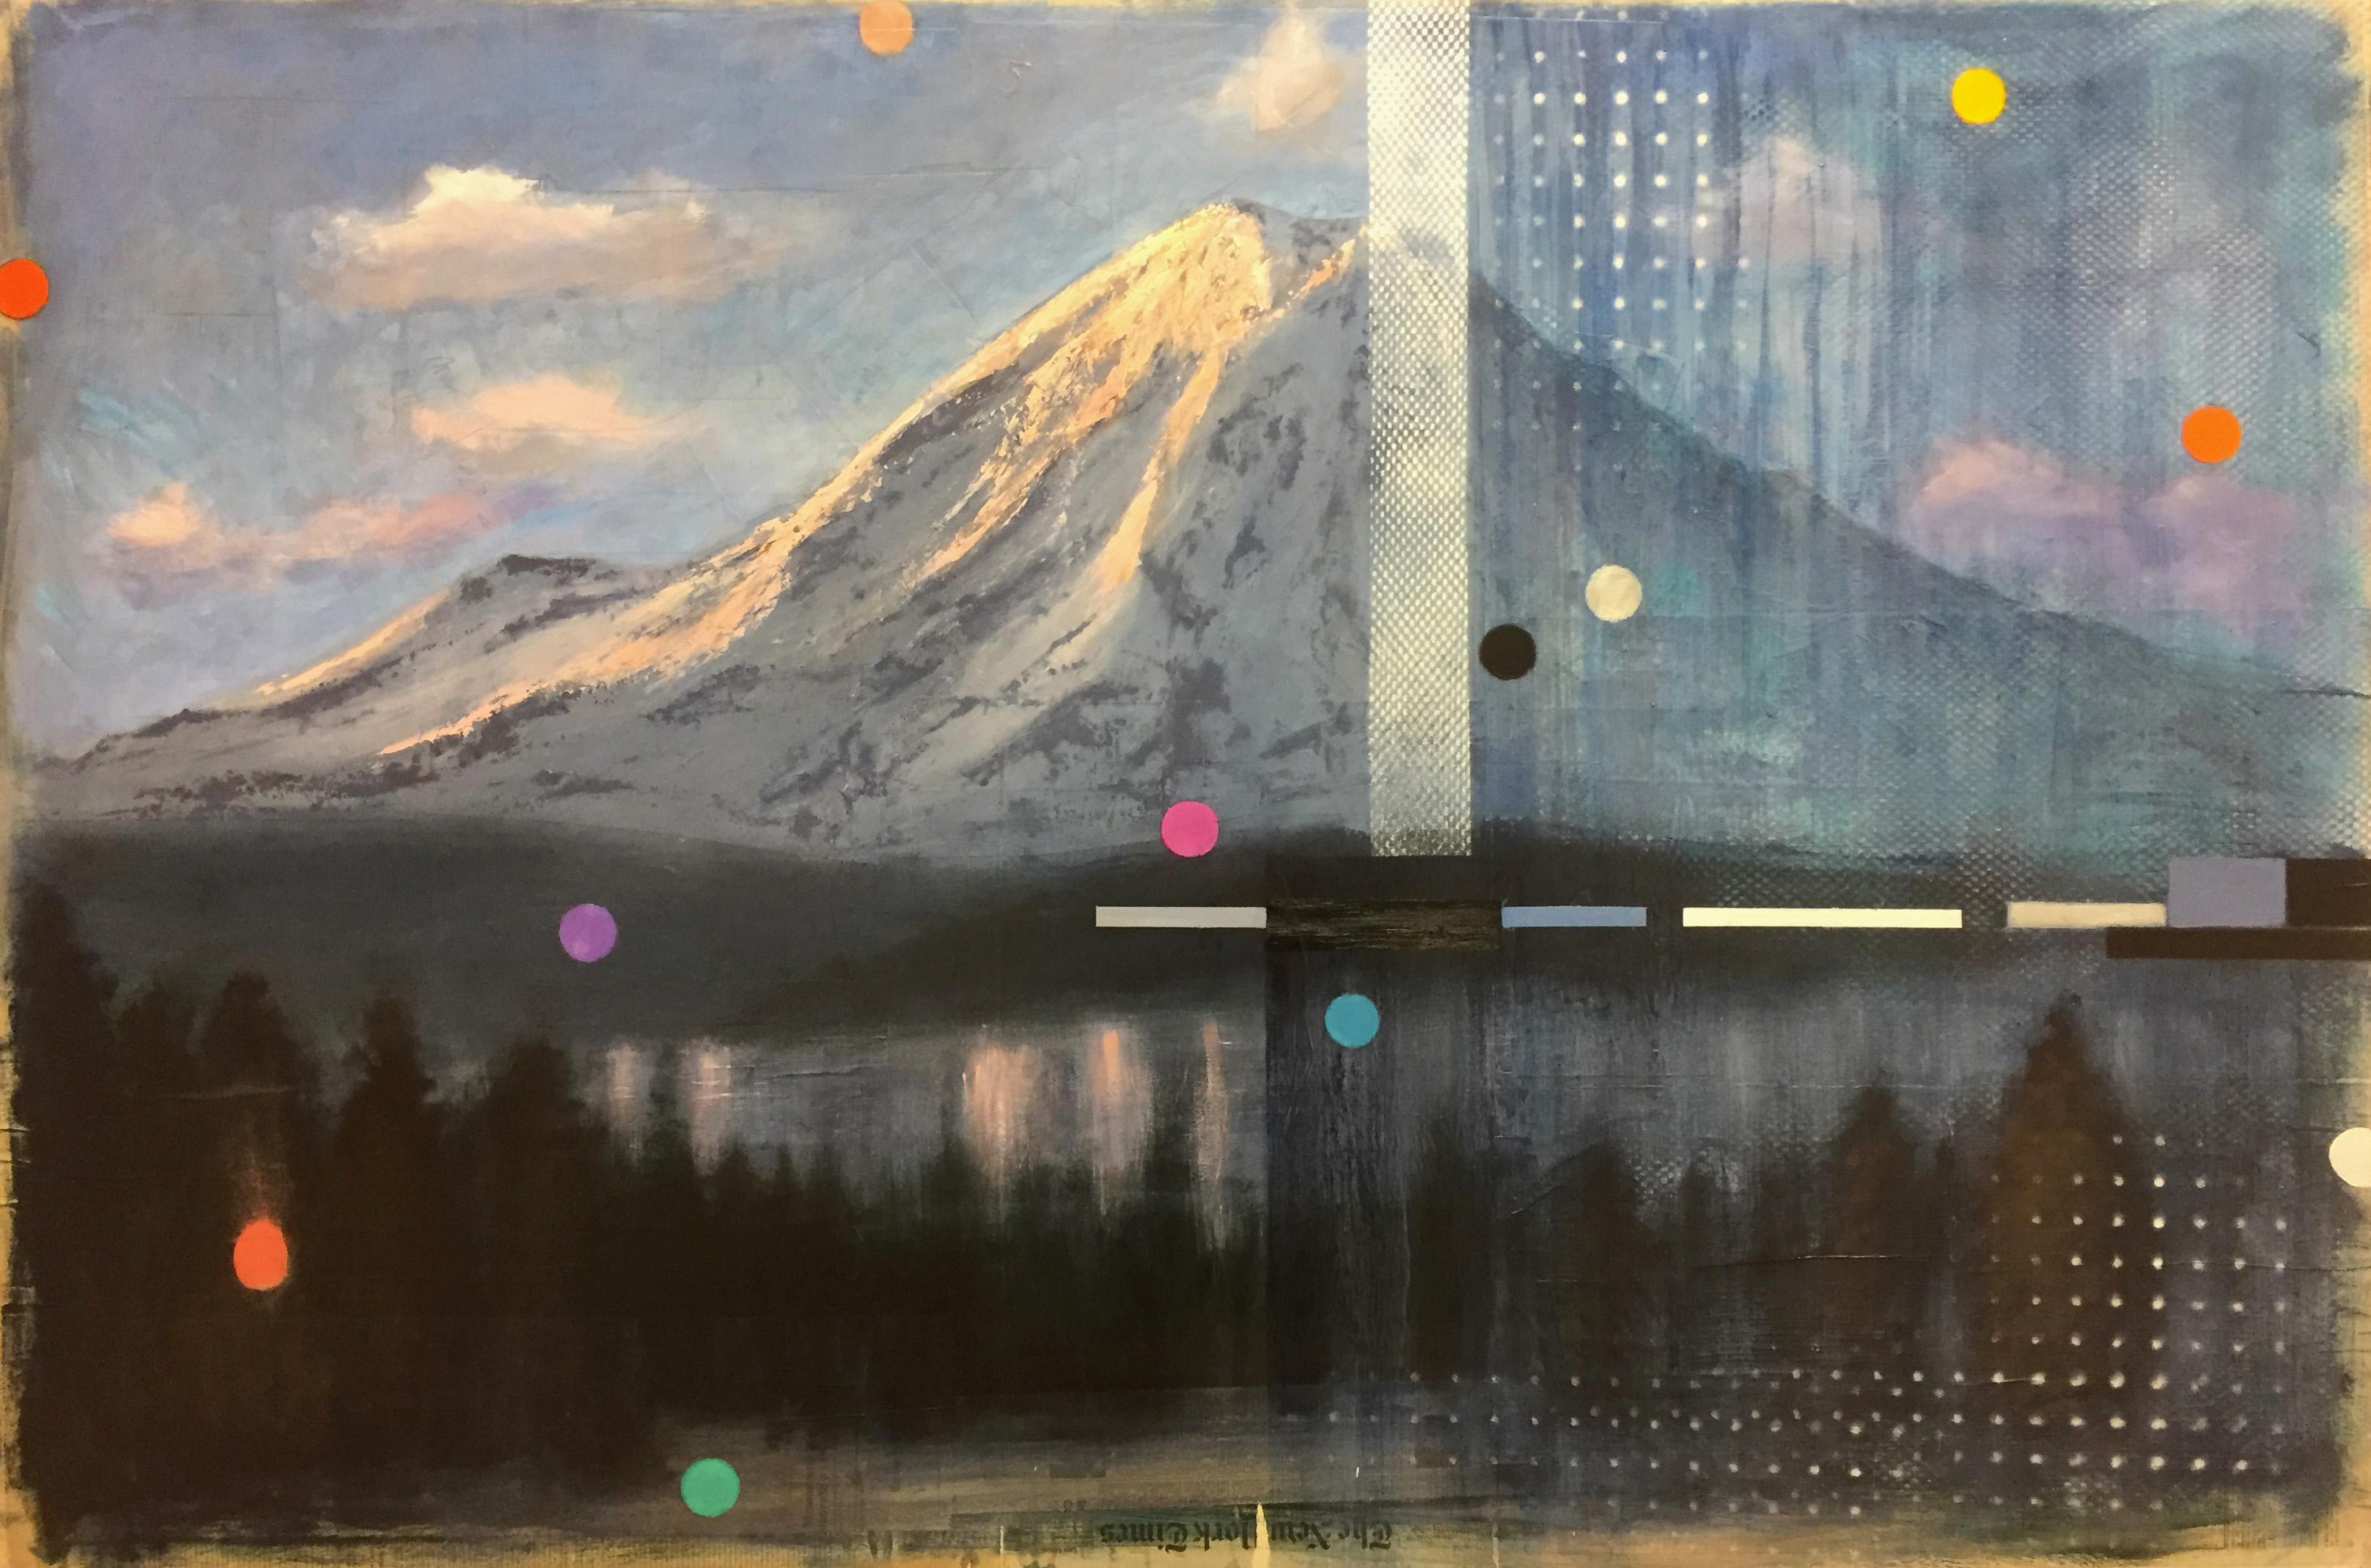 BIG ROCK CANDY MOUNTAIN - Painting by Adam Straus